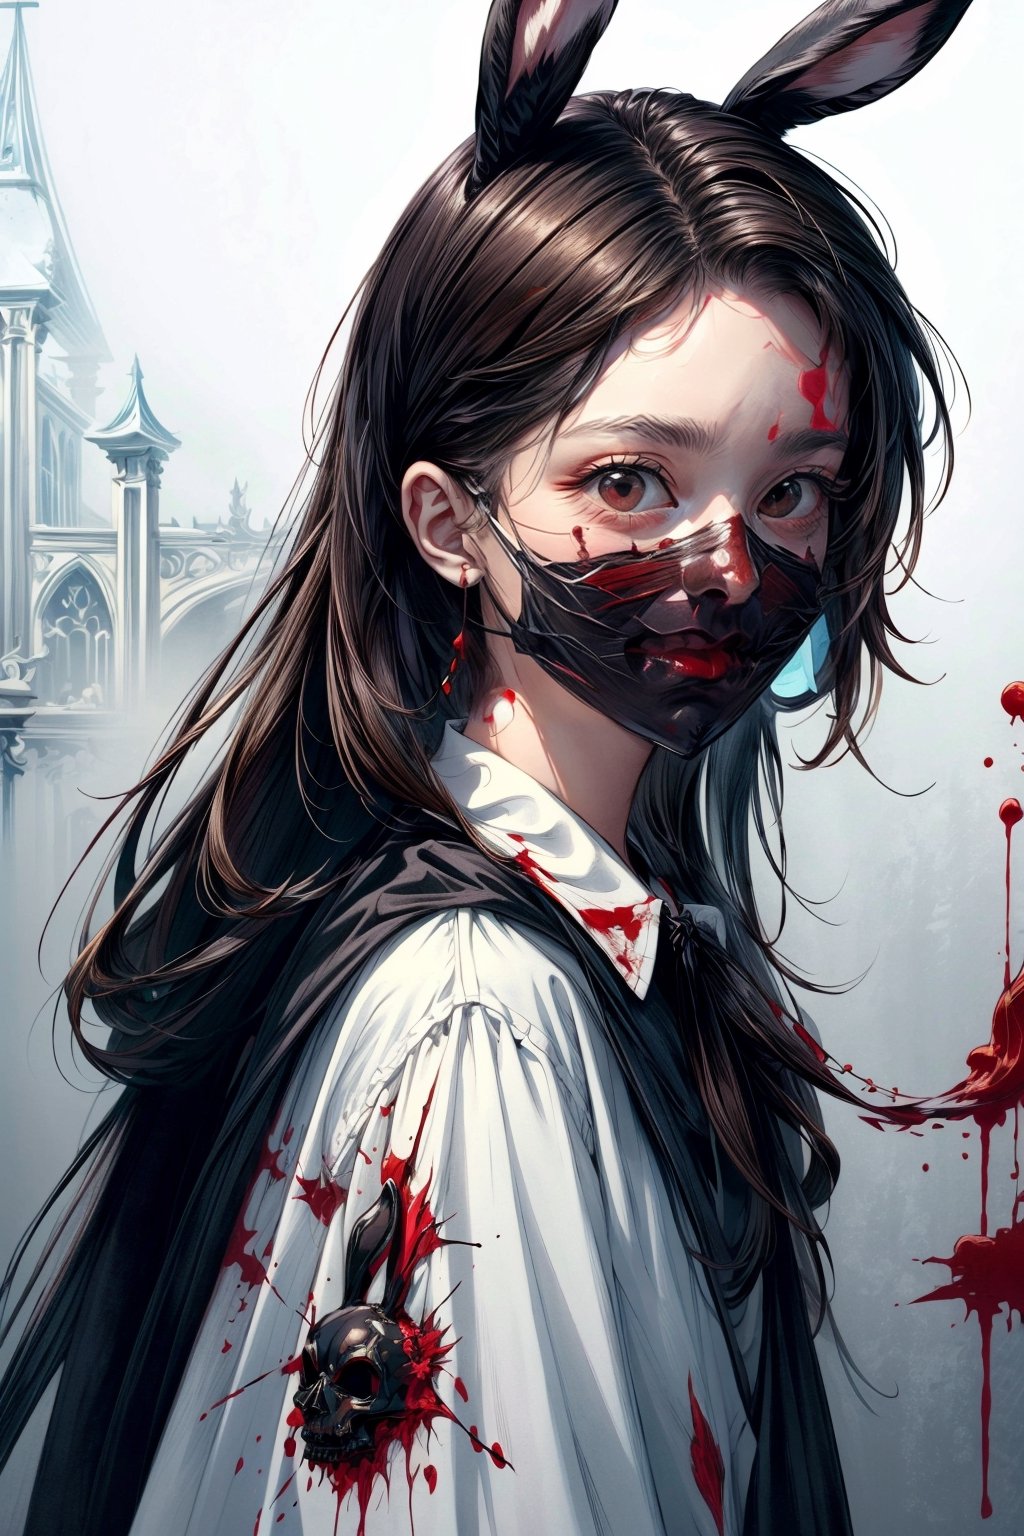 A boy with dark brown hair, wearing a Killer Bunny mask, portrait format, bloodied, gothic and dramatic background. Wearing common clothes in a white blouse stained with blood.